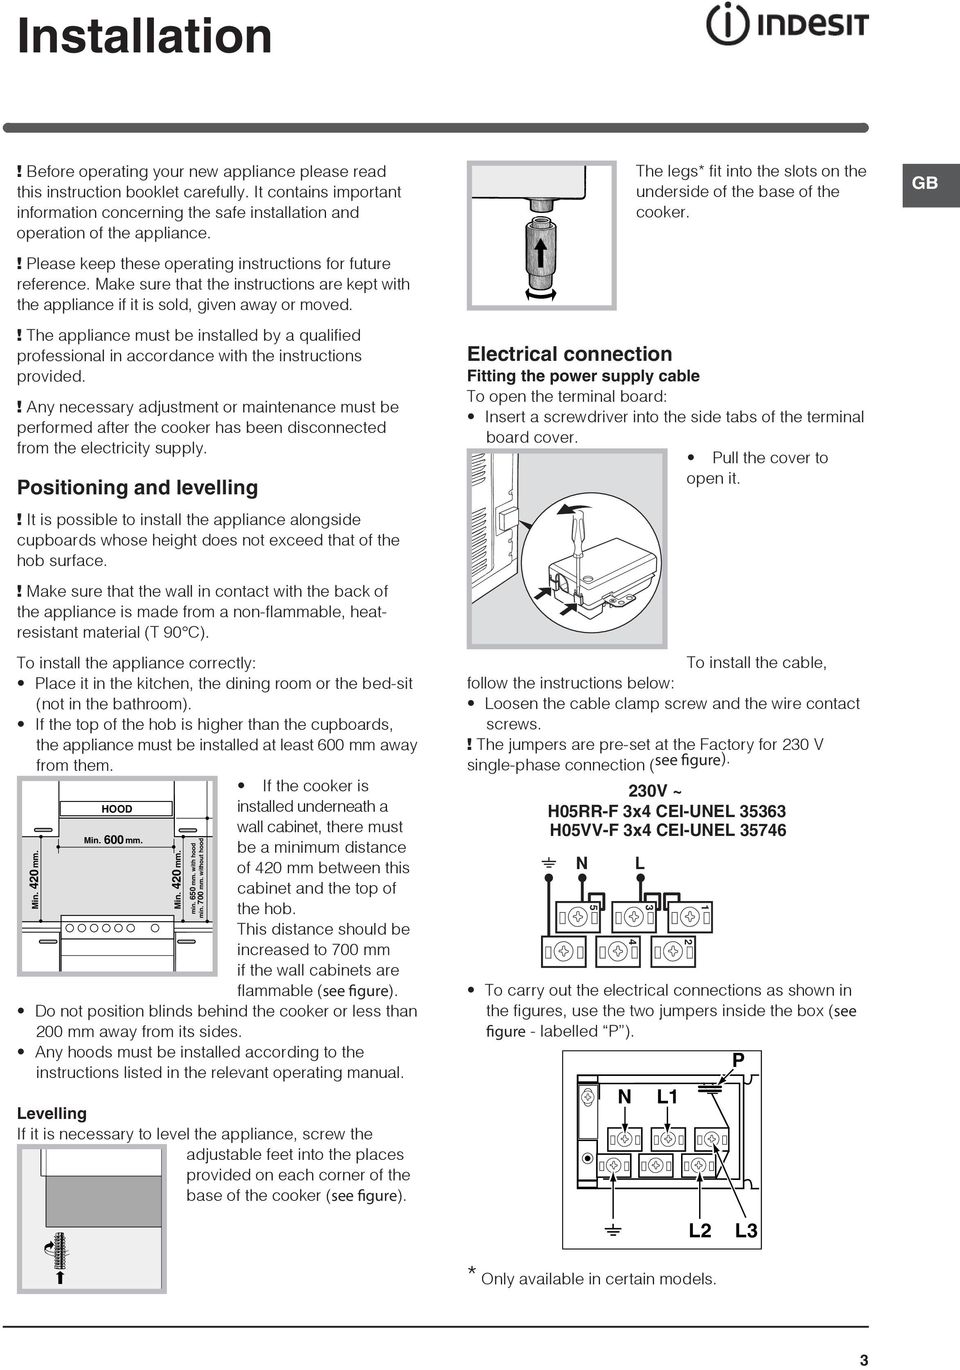 ! The appliance must be installed by a qualified professional in accordance with the instructions provided.